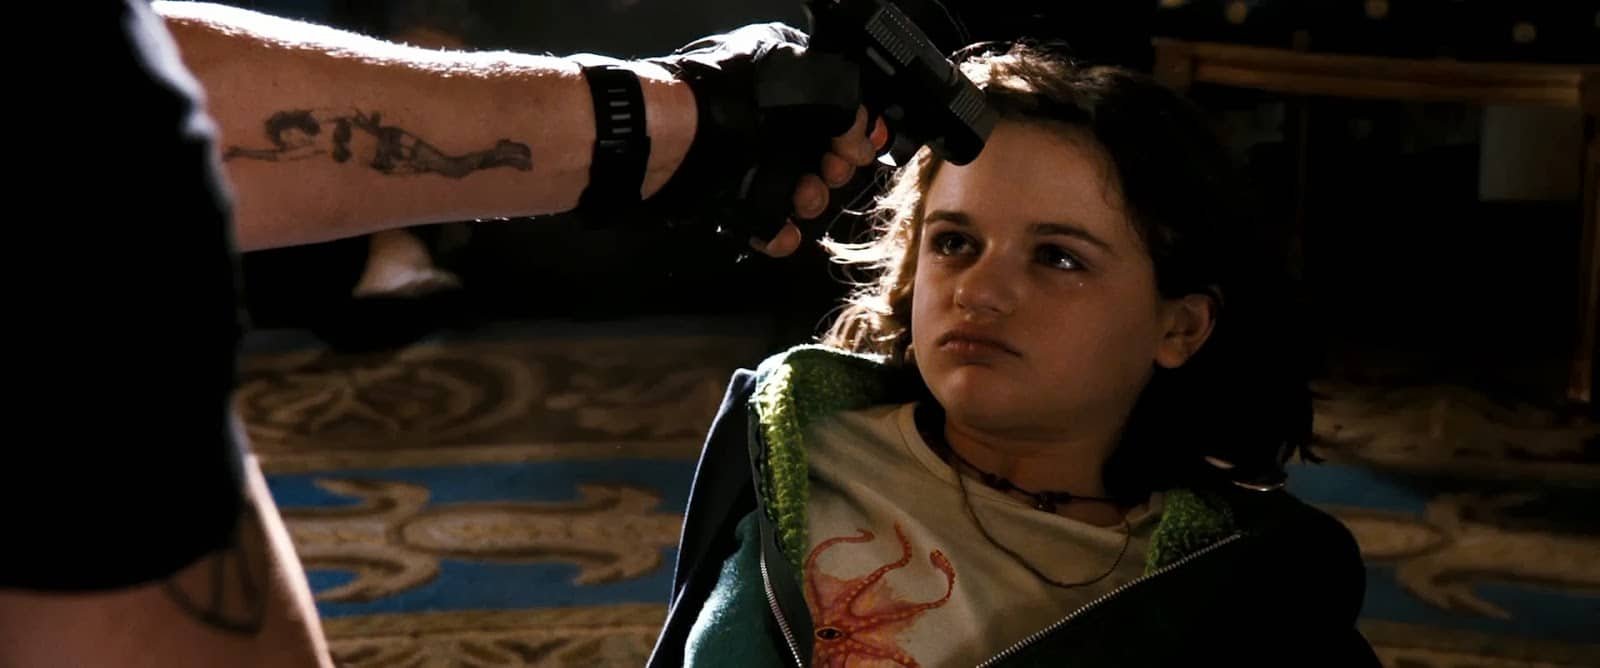 Joey King in the movie White House Down